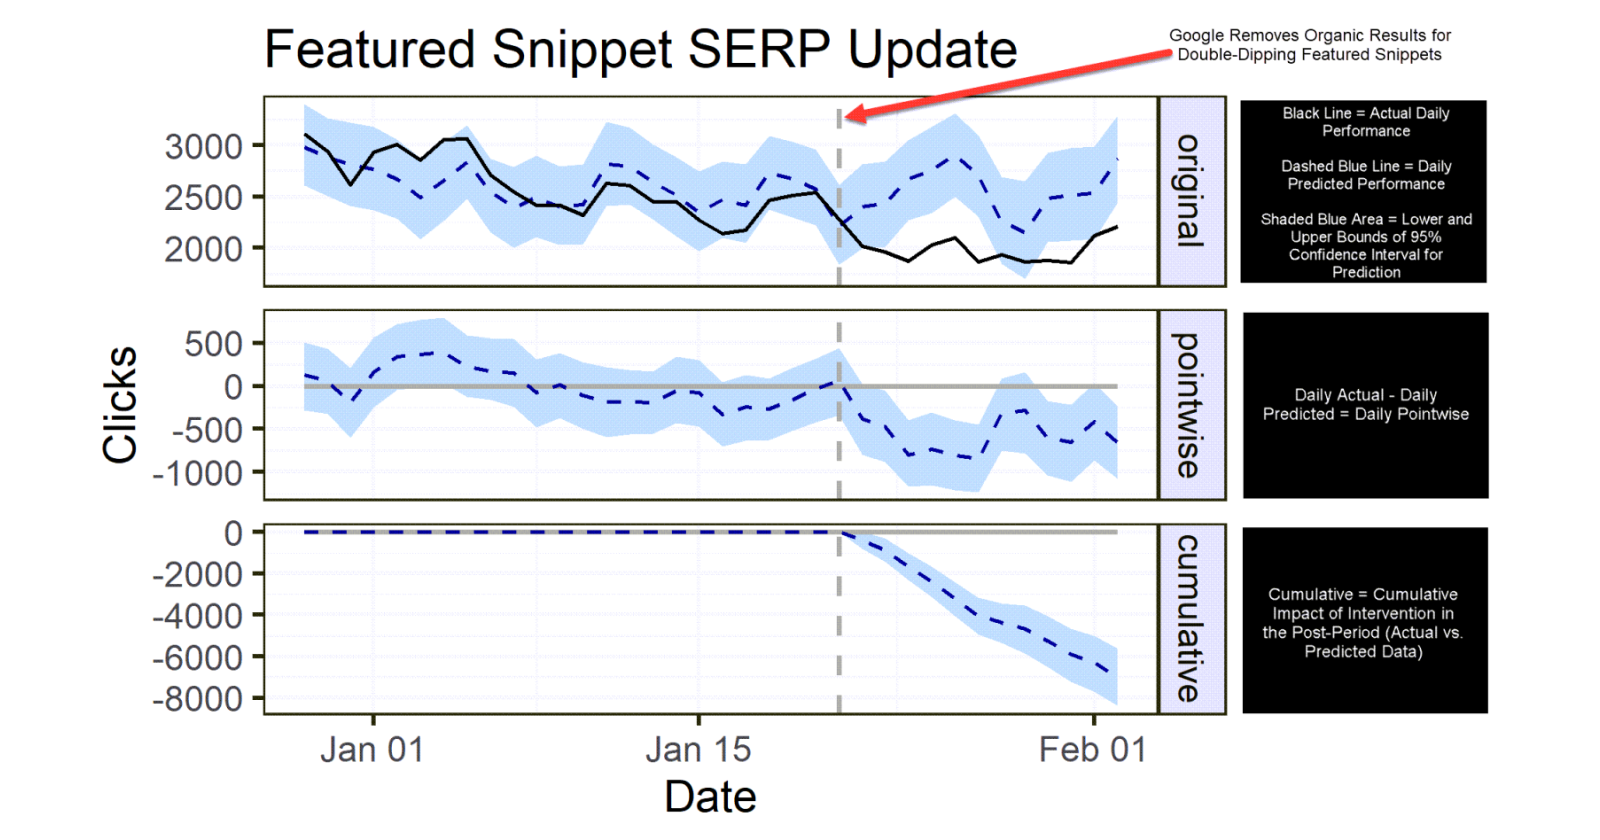 Unpacking the CausalImpact of Google’s Double-Dipping Featured Snippet Update